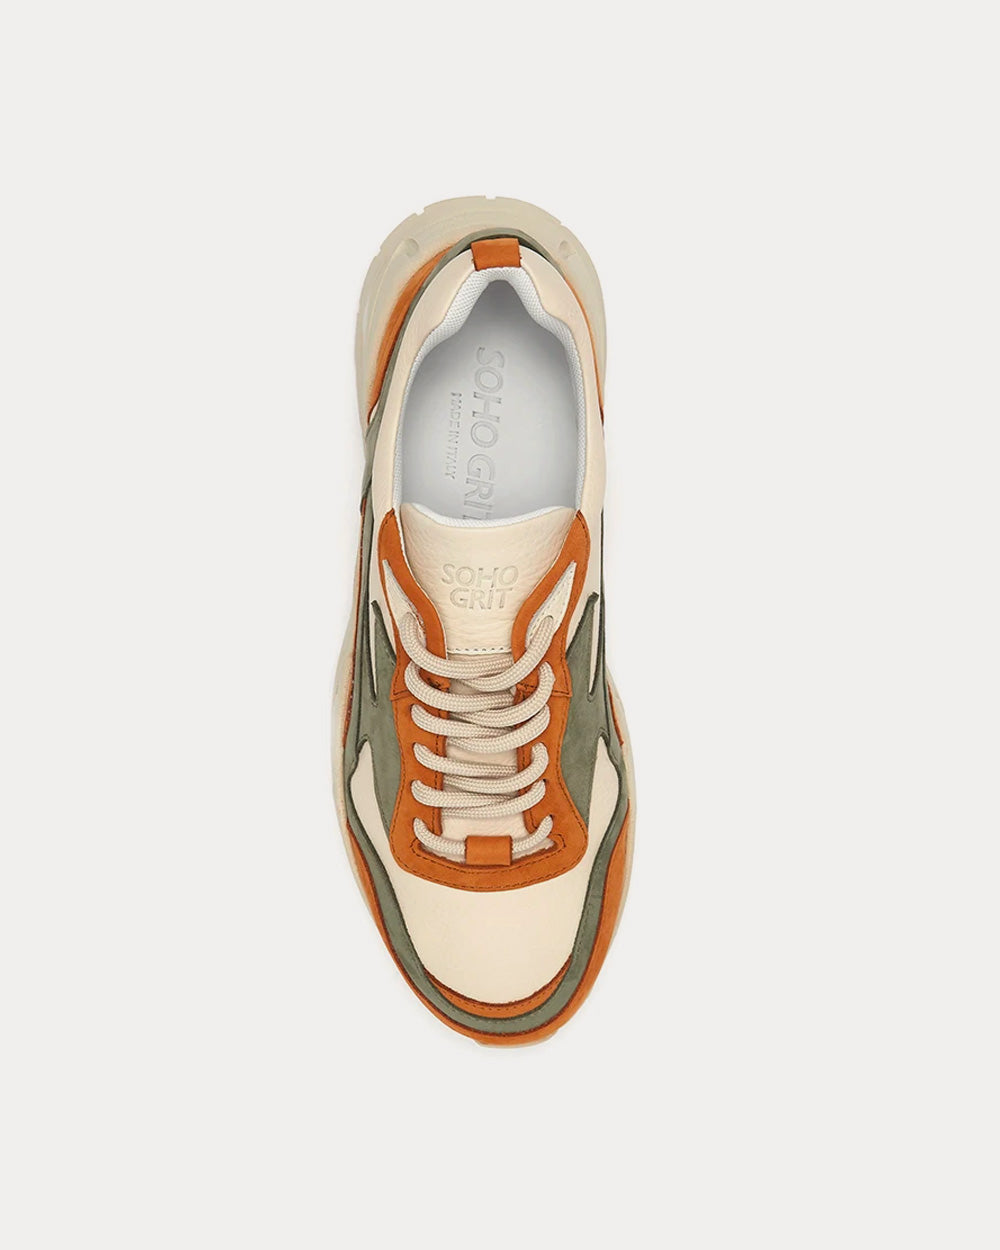 Soho Grit - The Hollen Caramel Stone Cream Low Top Sneakers